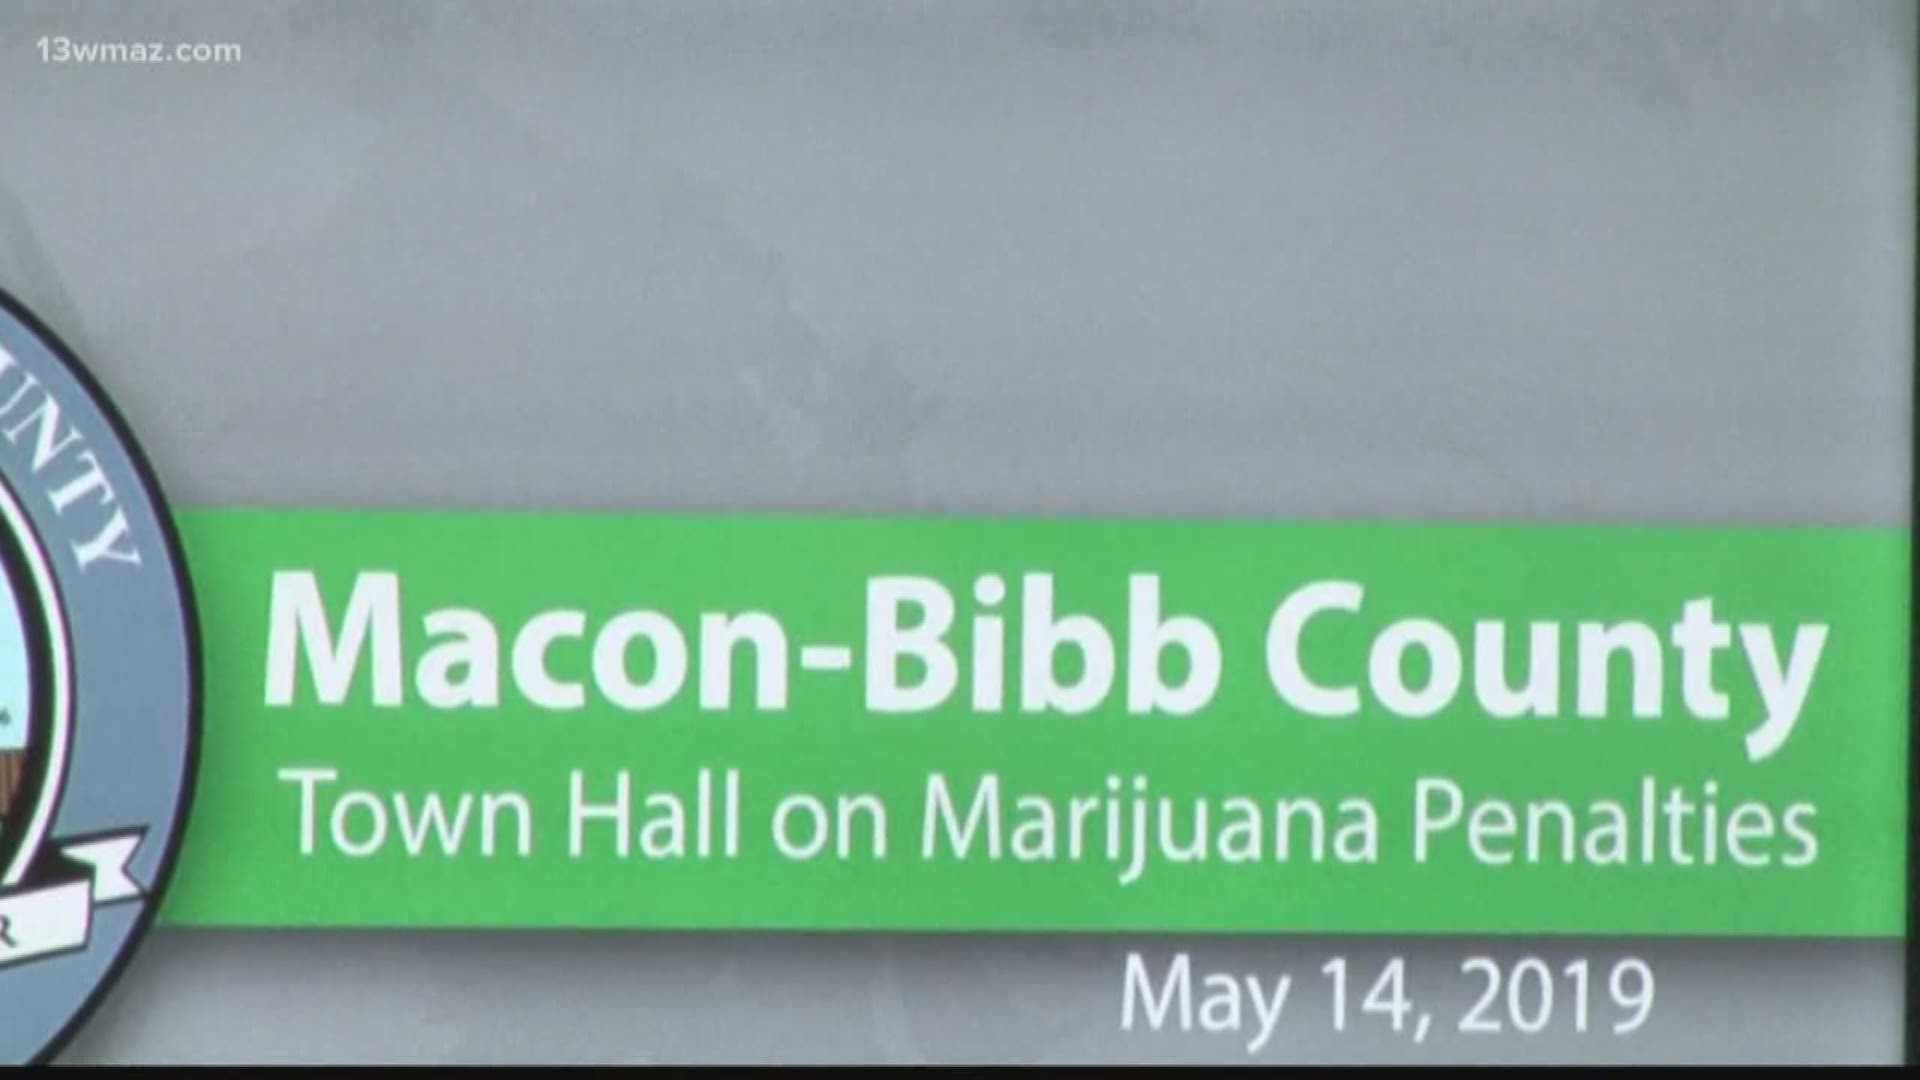 Bibb County commissioners held a town hall Tuesday night to talk about the possibility of reducing the penalties for possession of small amounts of marijuana. We heard from people on both sides of the aisle about whether or not penalties should change, but it seems like this bill has overwhelming support.